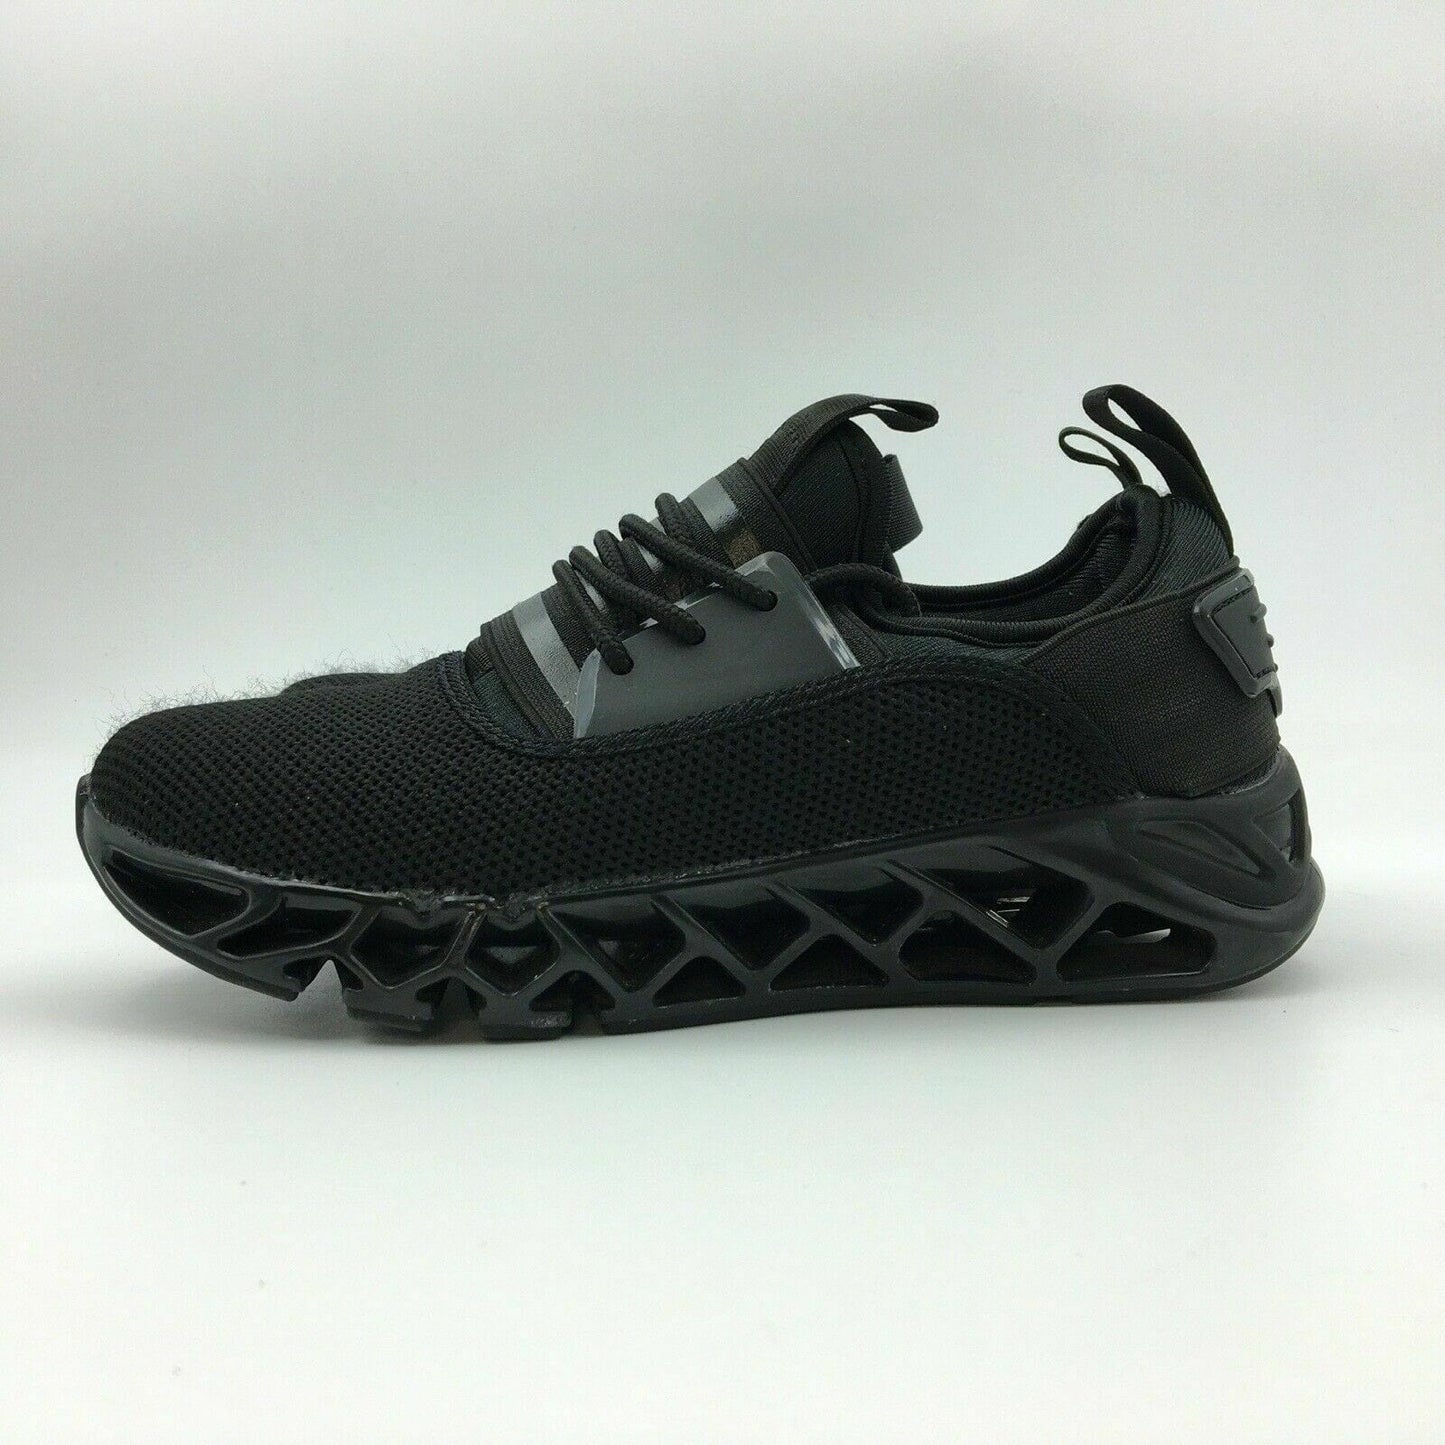 Cloud 1 Womens Size 5 Black Athletic Shoes Running Sneakers BM-AE19003 Comfort